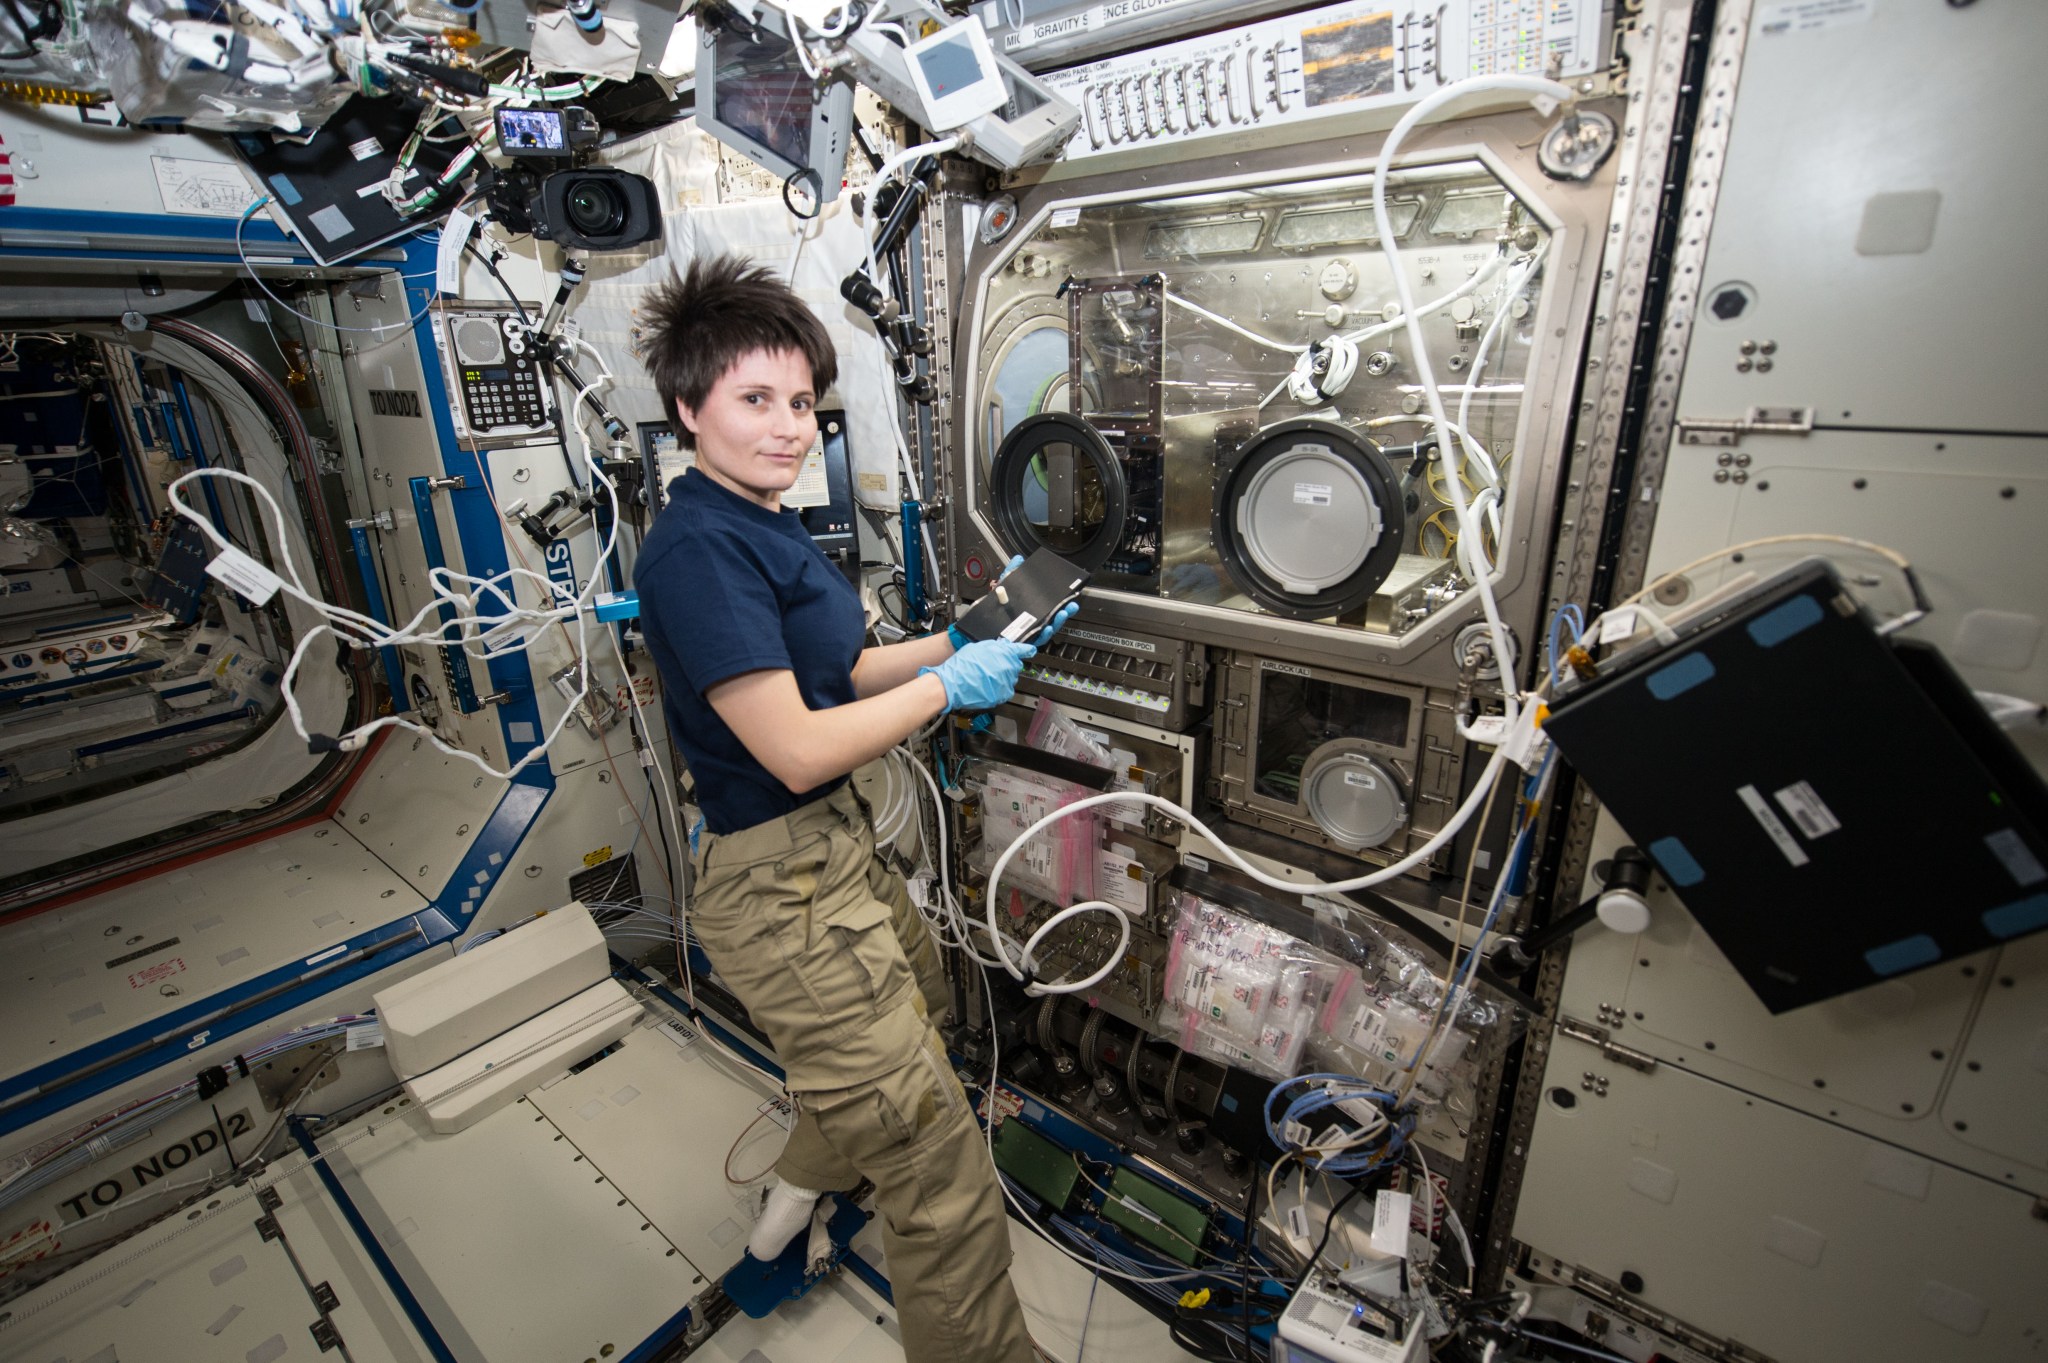 European Space Agency astronaut Samantha Cristoforetti works with the Microgravity Science Glovebox aboard the International Space Station in 2014.